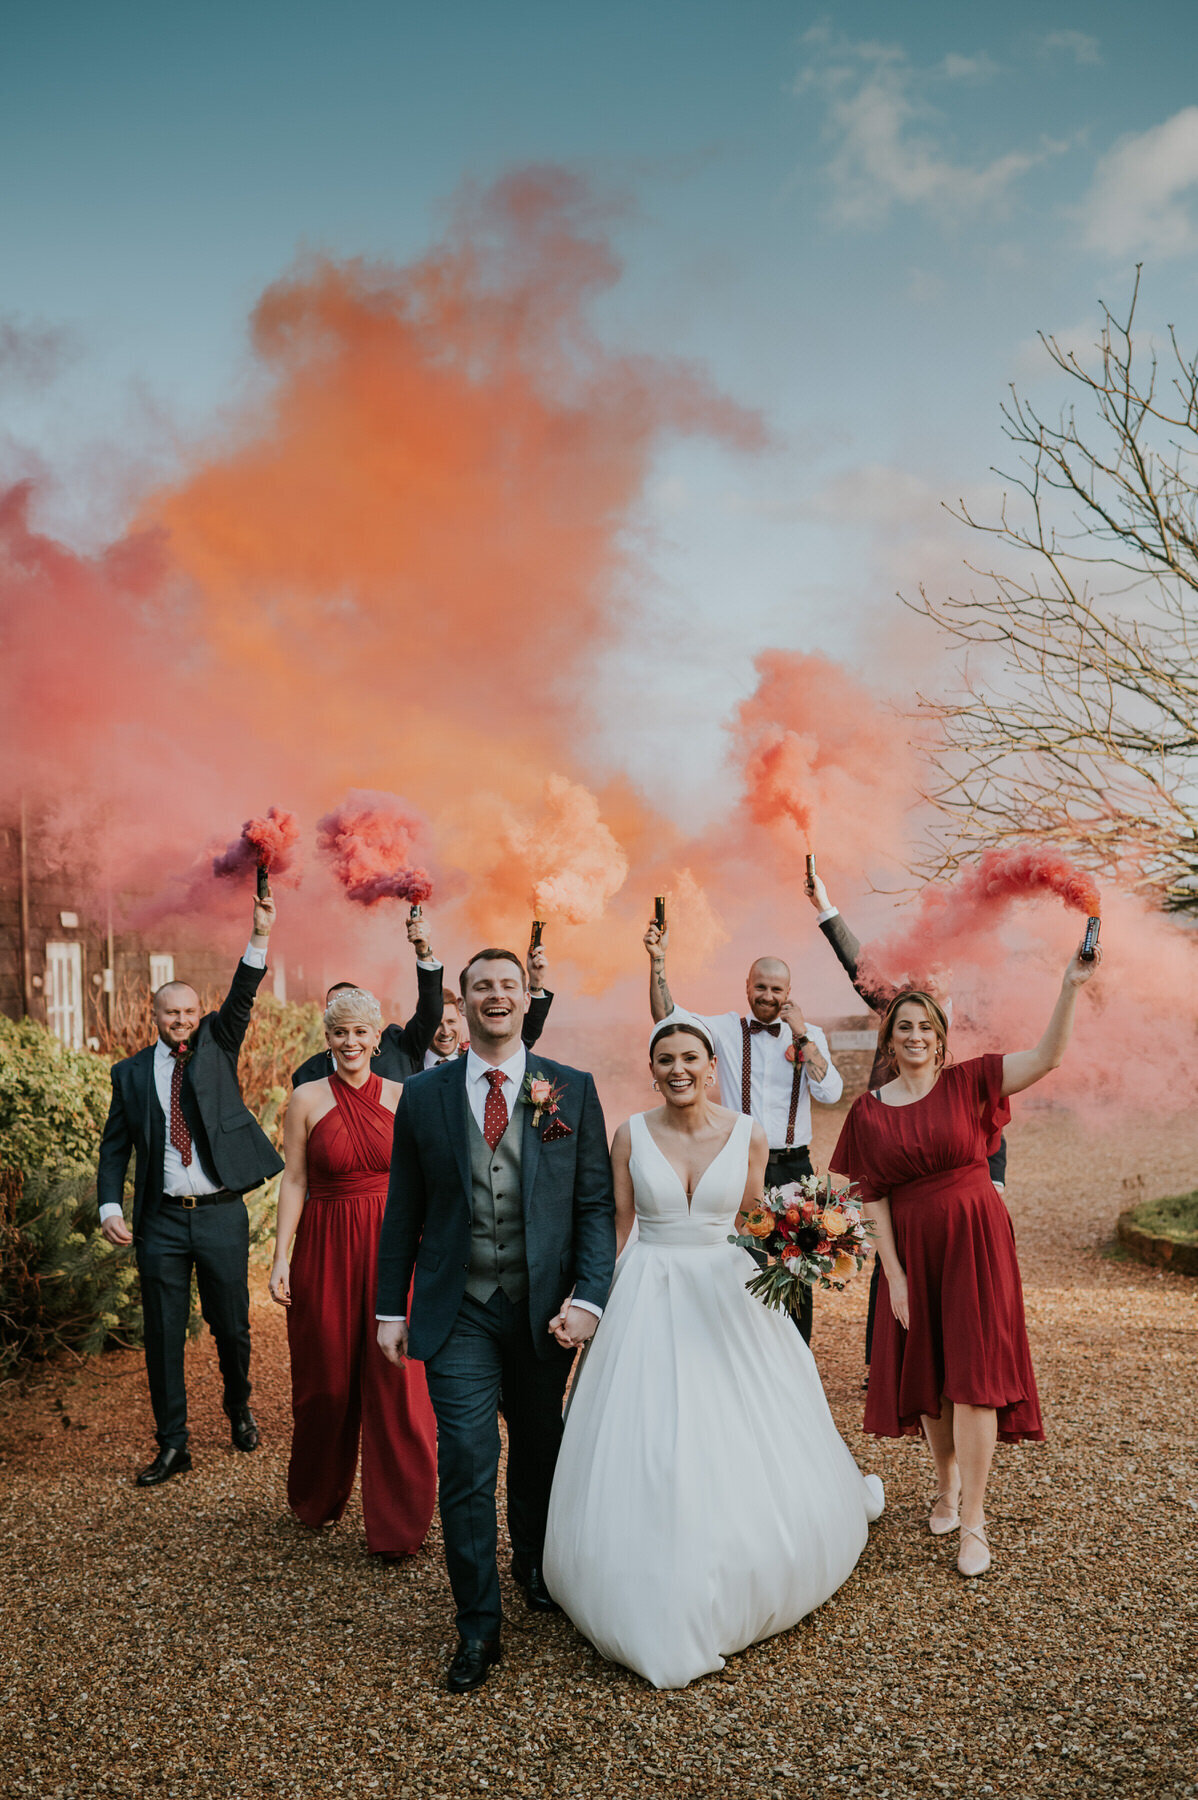 A bride and grrom with their bridal party walking with smoke bombs